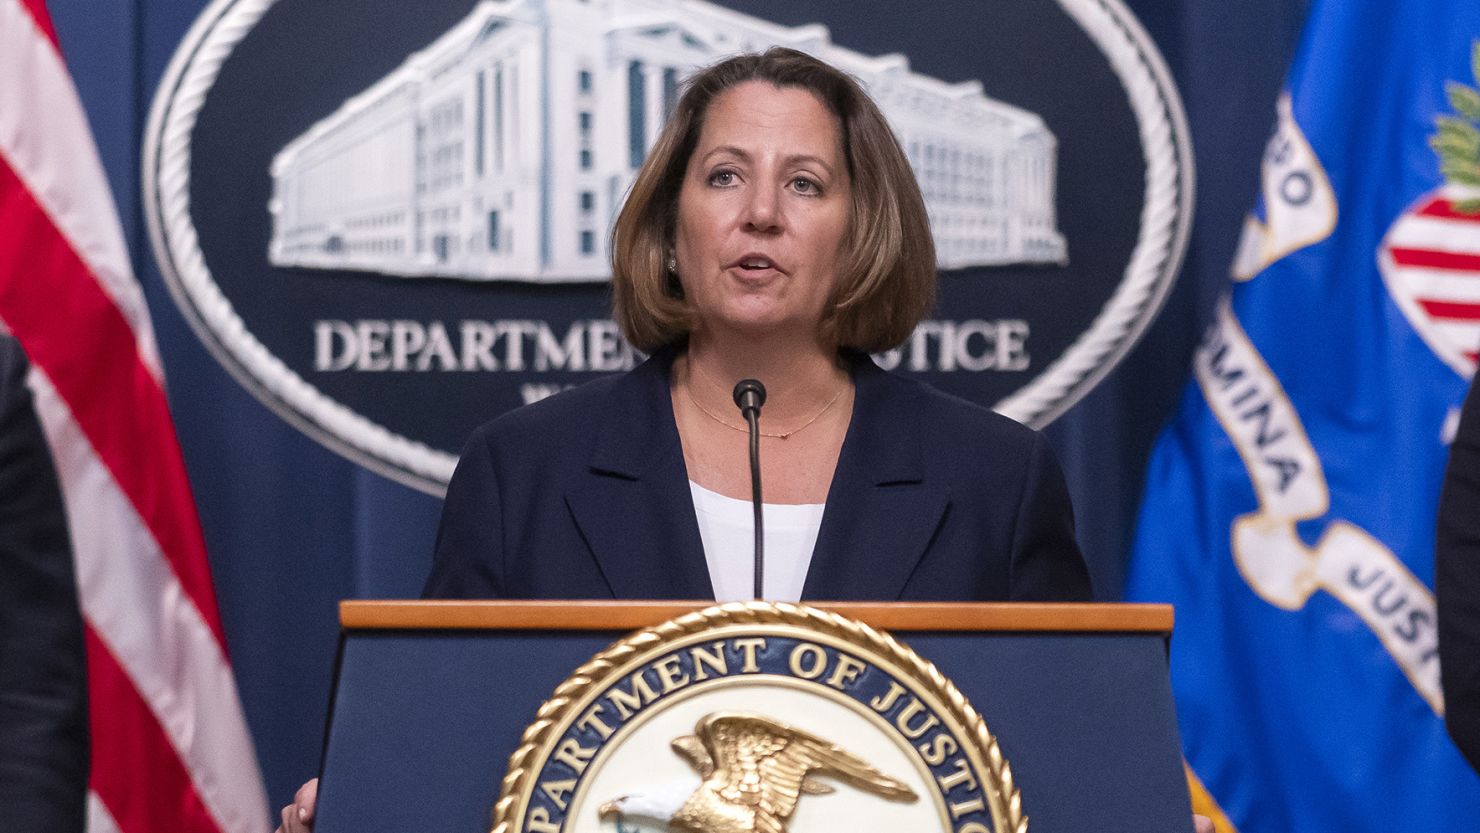 Deputy Attorney General Lisa Monaco announces international enforcement action against cryptocurrency exchange Bitzlato and the arrest of the company's founder, Russian national Anatoly Legkodymov, during a news conference at the Justice Department, Wednesday, Jan. 18, 2023, in Washington. (AP Photo/Nathan Howard)